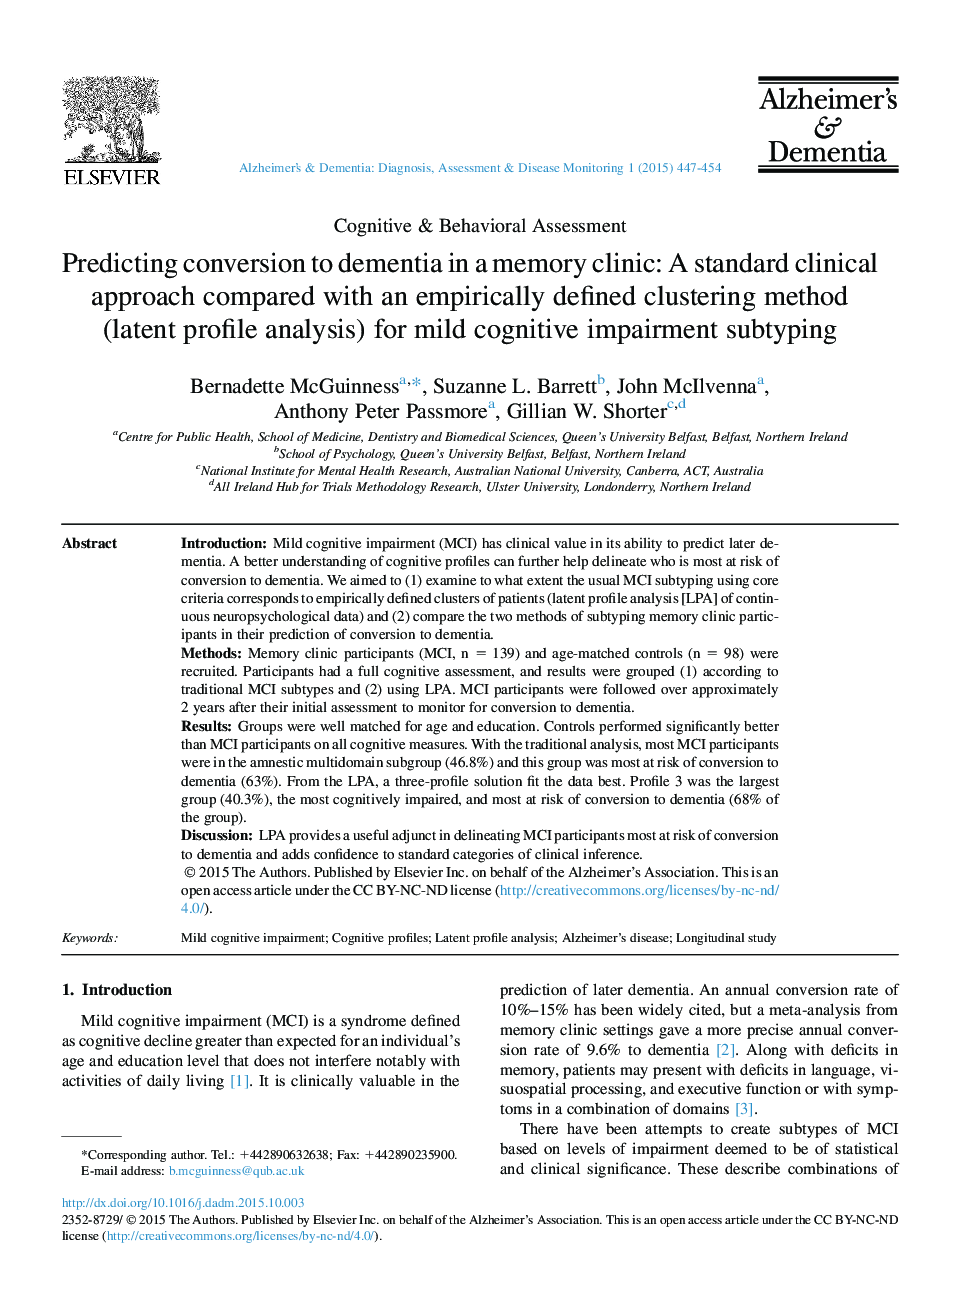 Predicting conversion to dementia in a memory clinic: A standard clinical approach compared with an empirically defined clustering method (latent profile analysis) for mild cognitive impairment subtyping